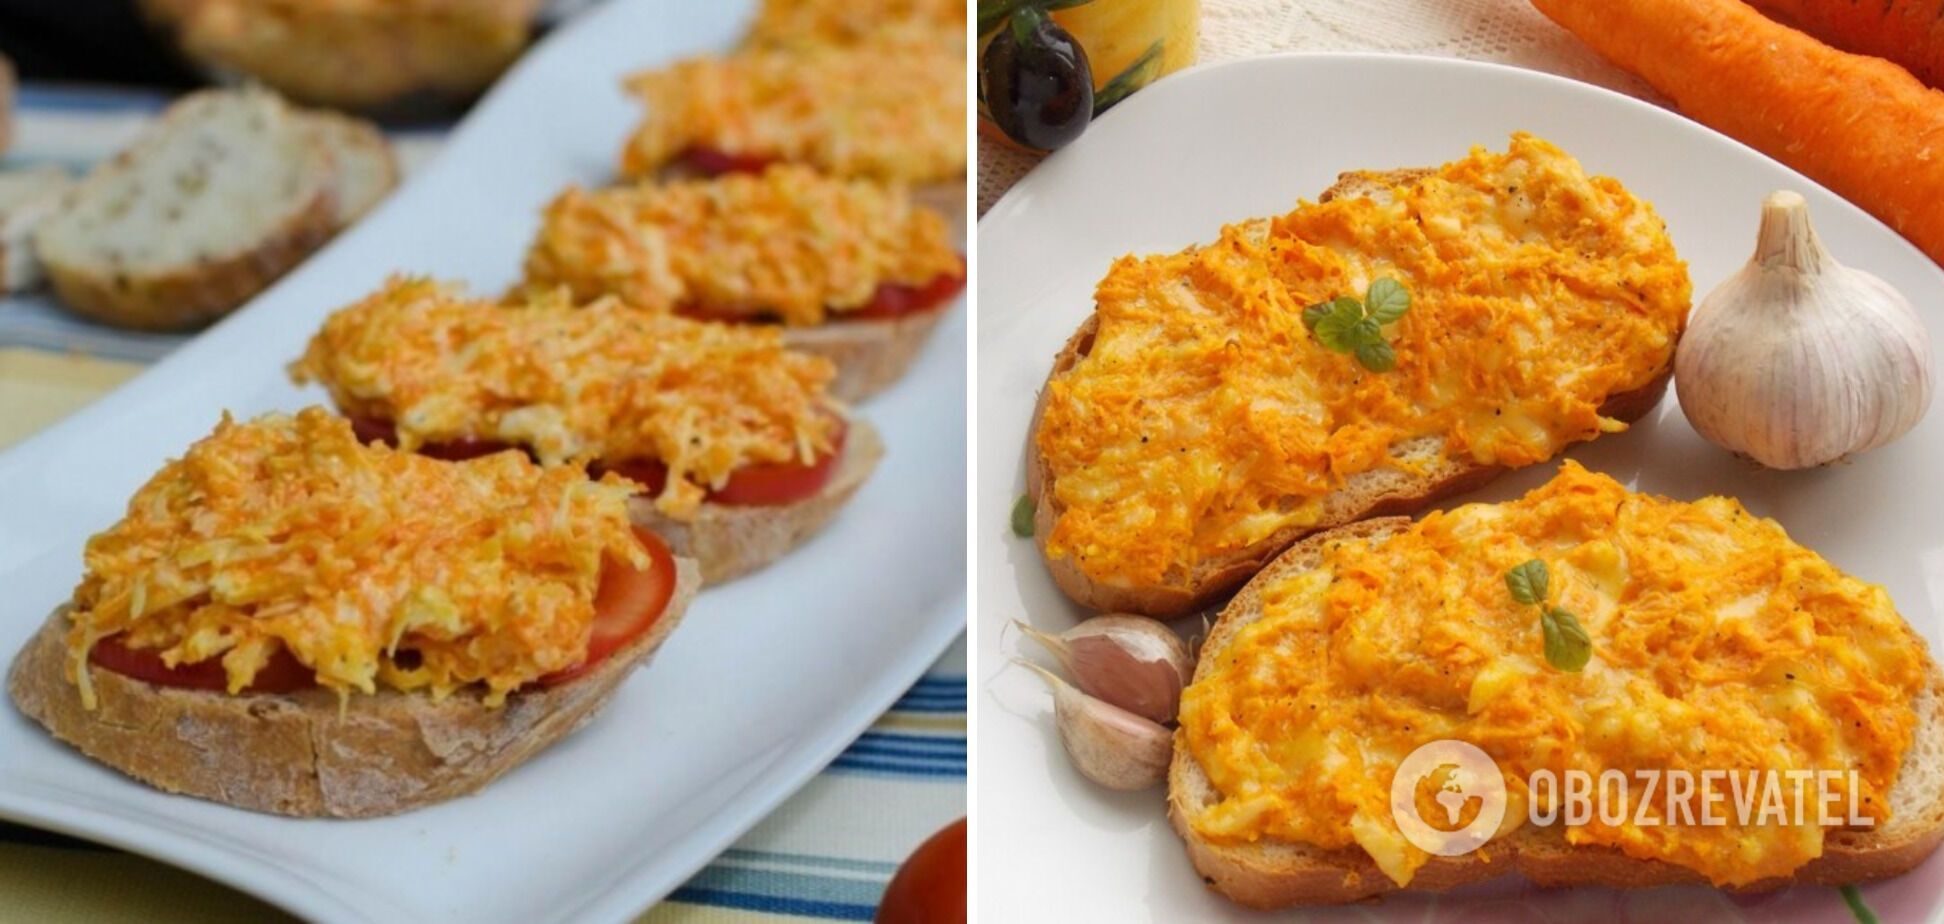 Sandwiches with hard cheese and carrots